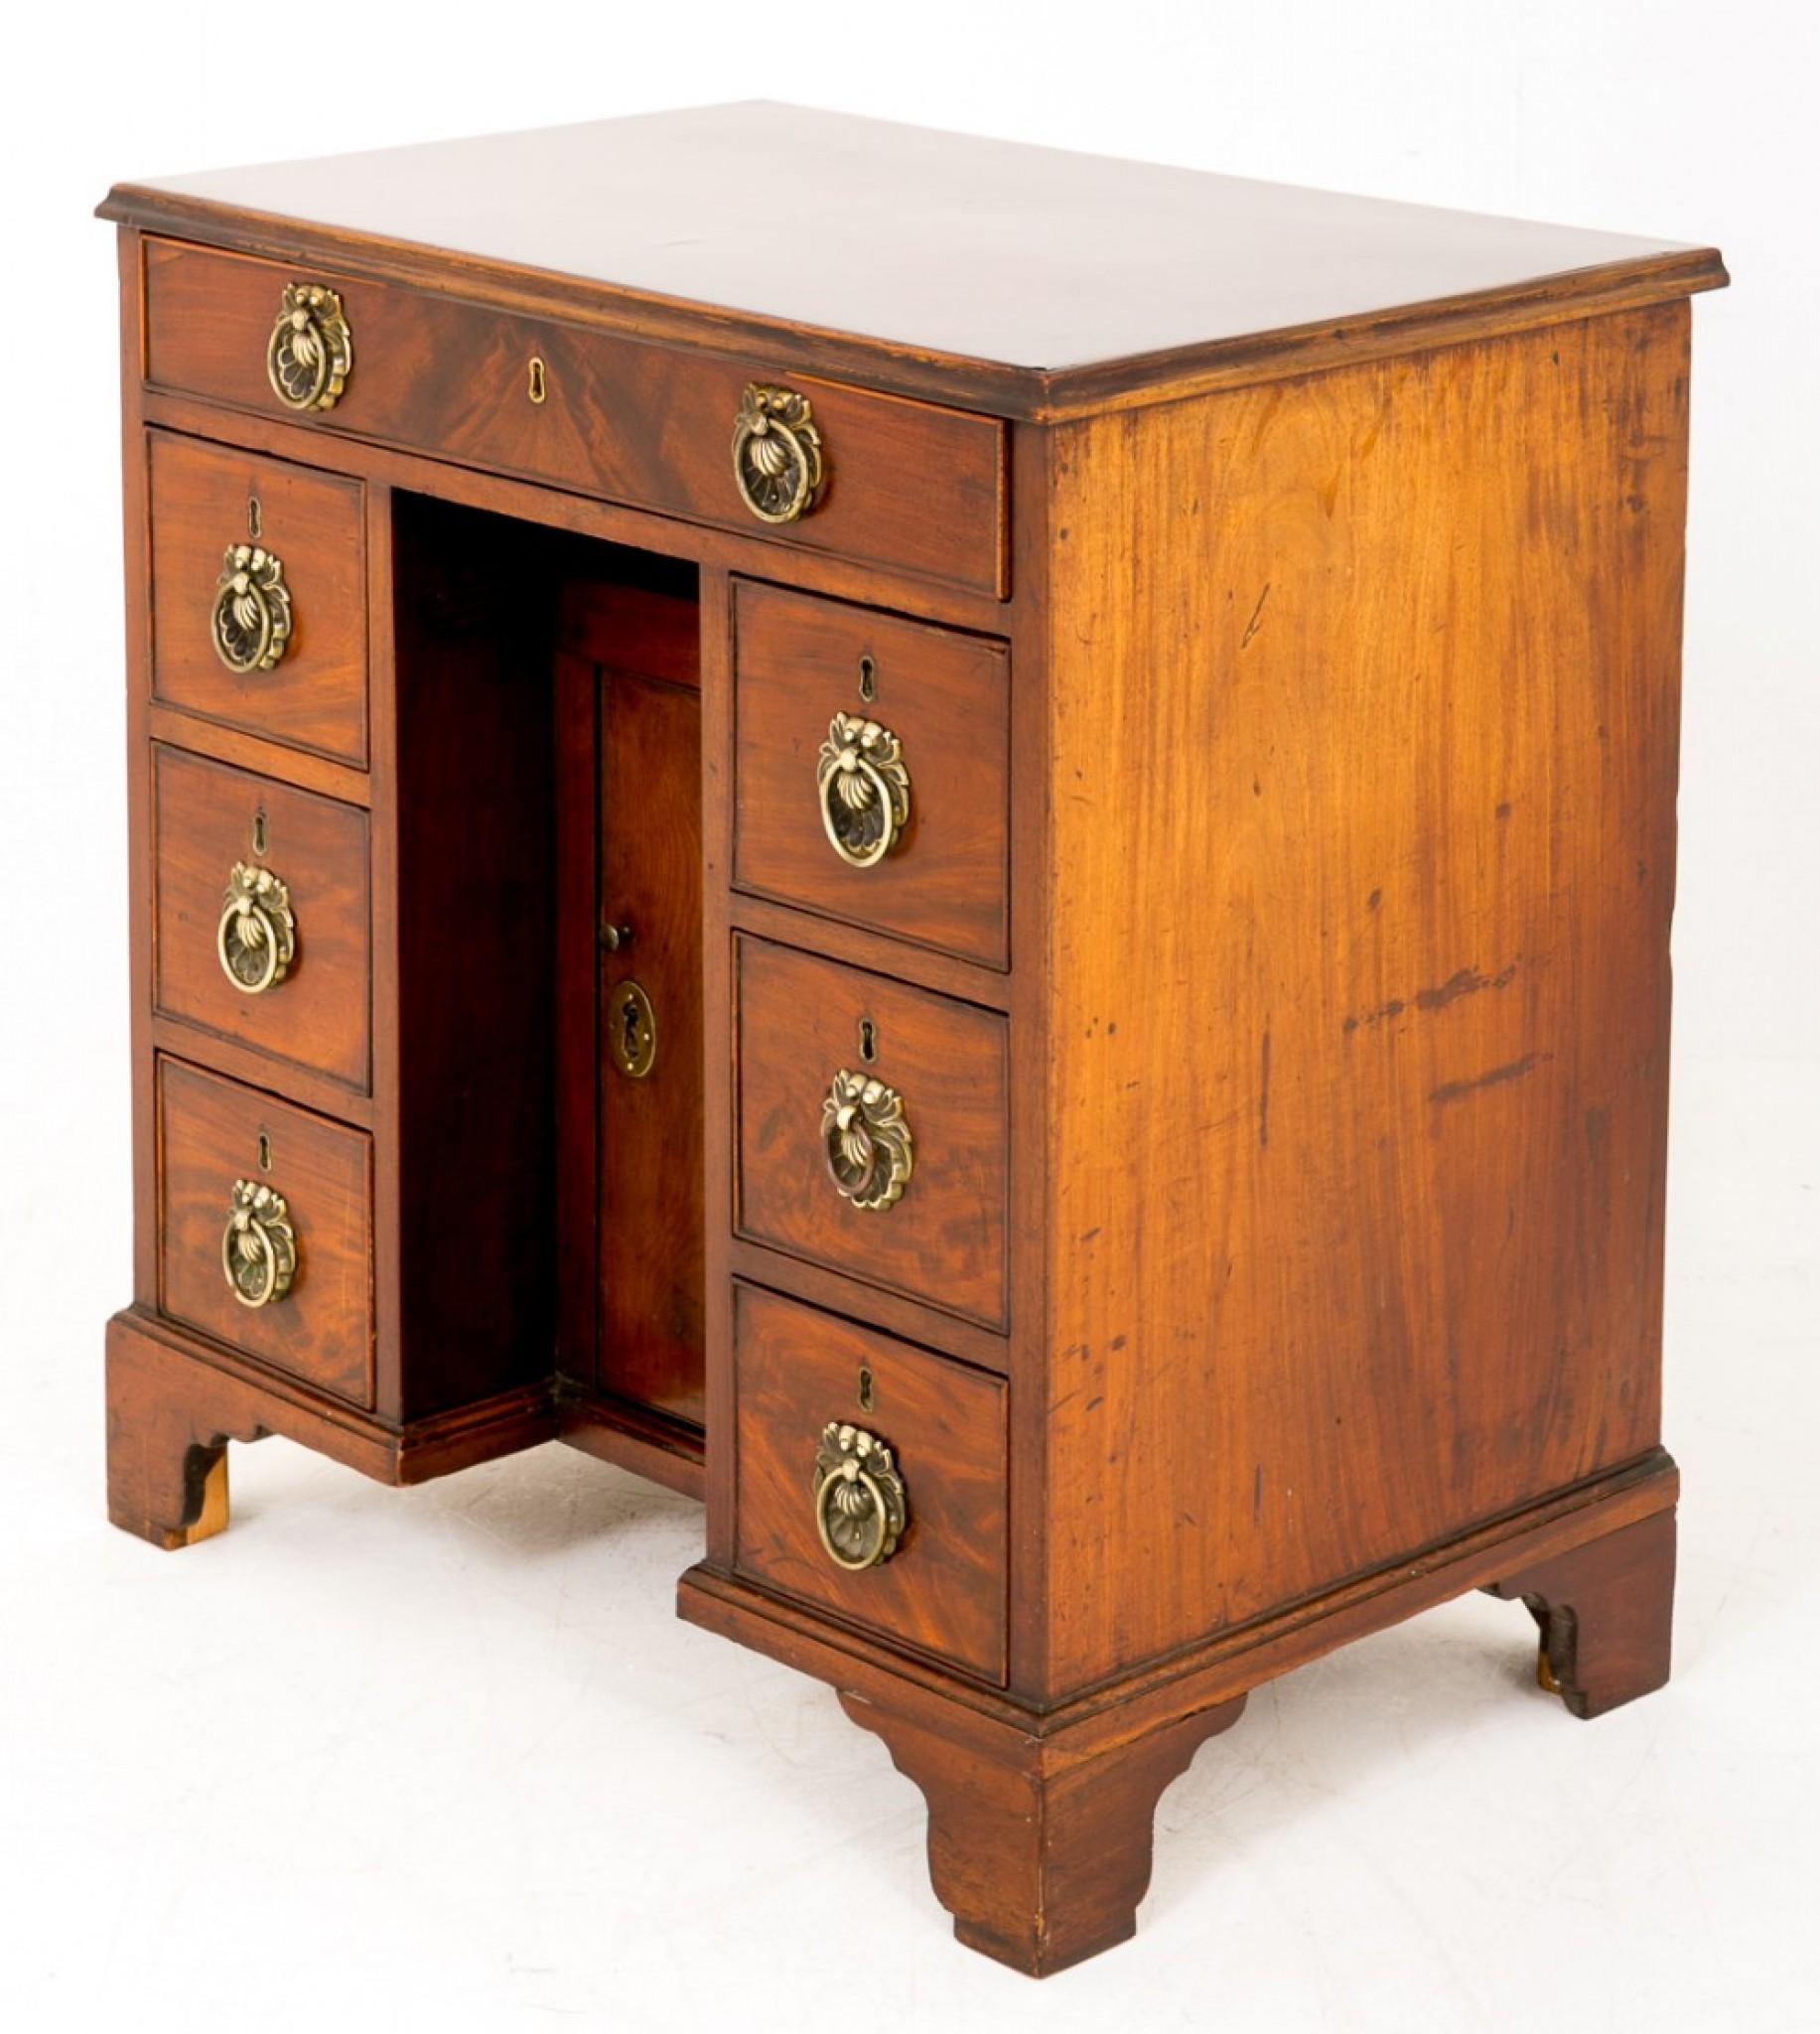 Georgian Mahogany Kneehole Desk.
Standing on bracket feet.
This piece features 7 Oak lined drawers and a central recessed cupboard.
Each drawer has a very pretty cast brass oyster shell ring pull handle.
The top with highly decorative timbers